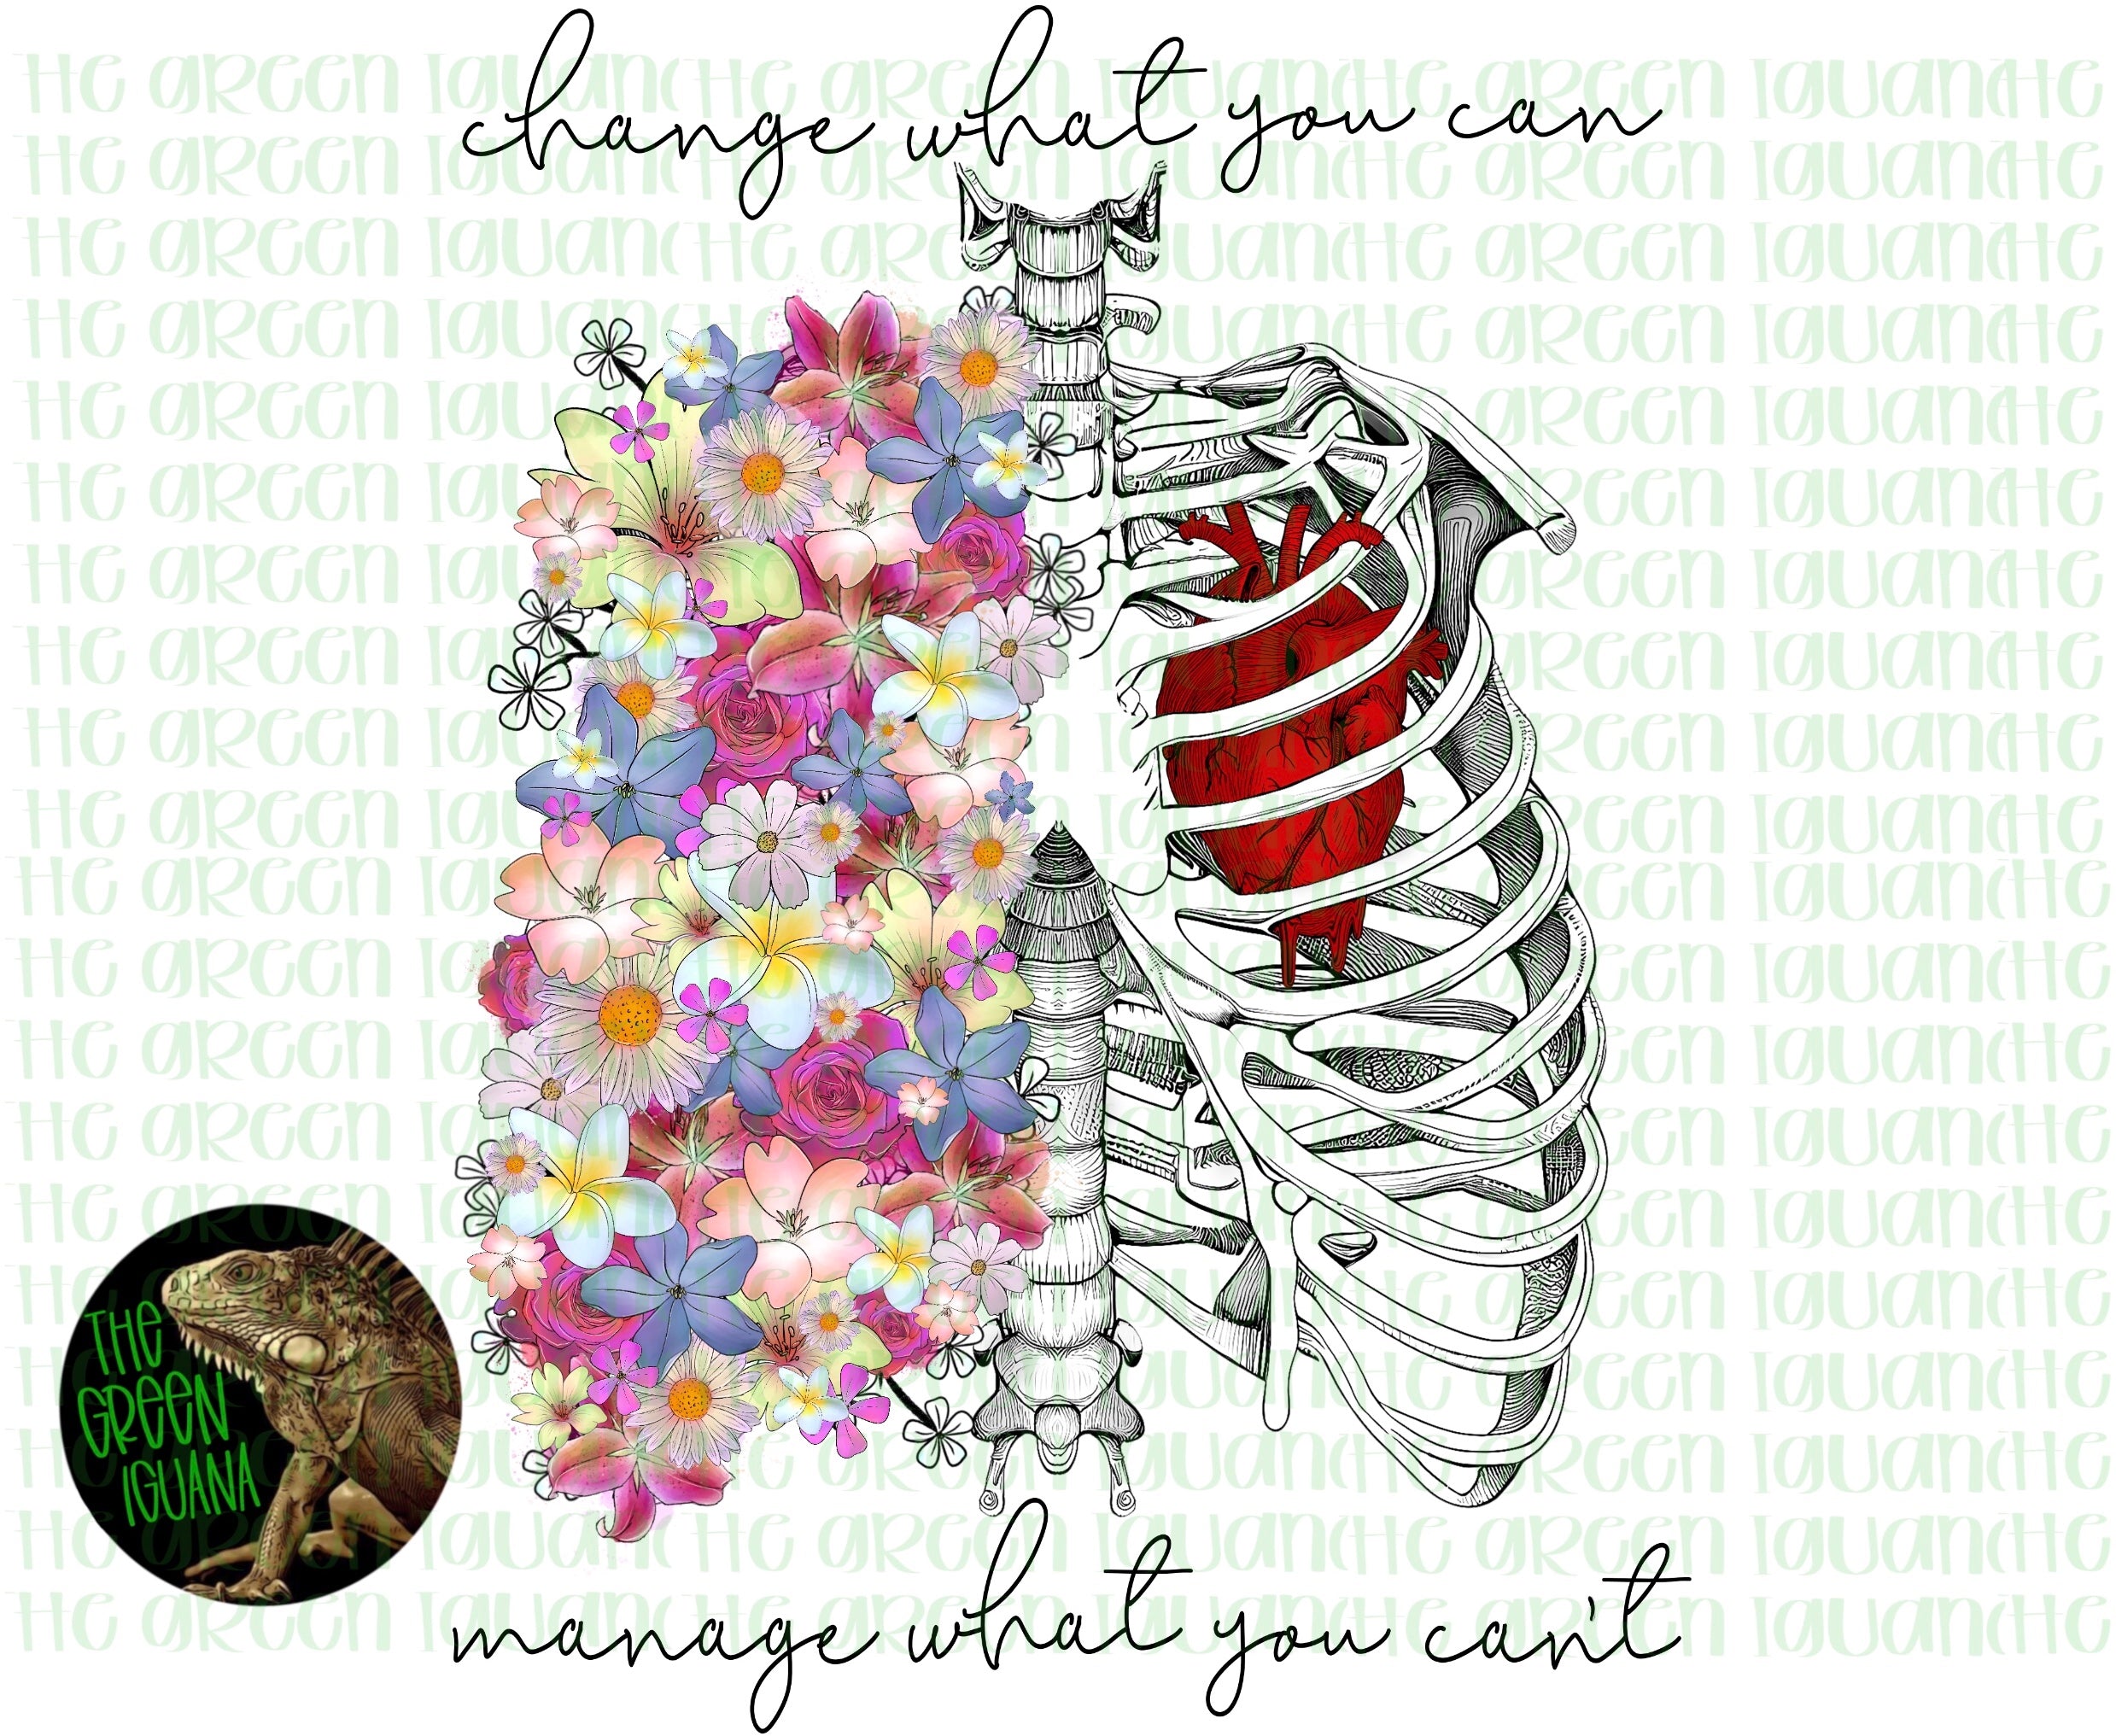 Change what you can, manage what you can’t